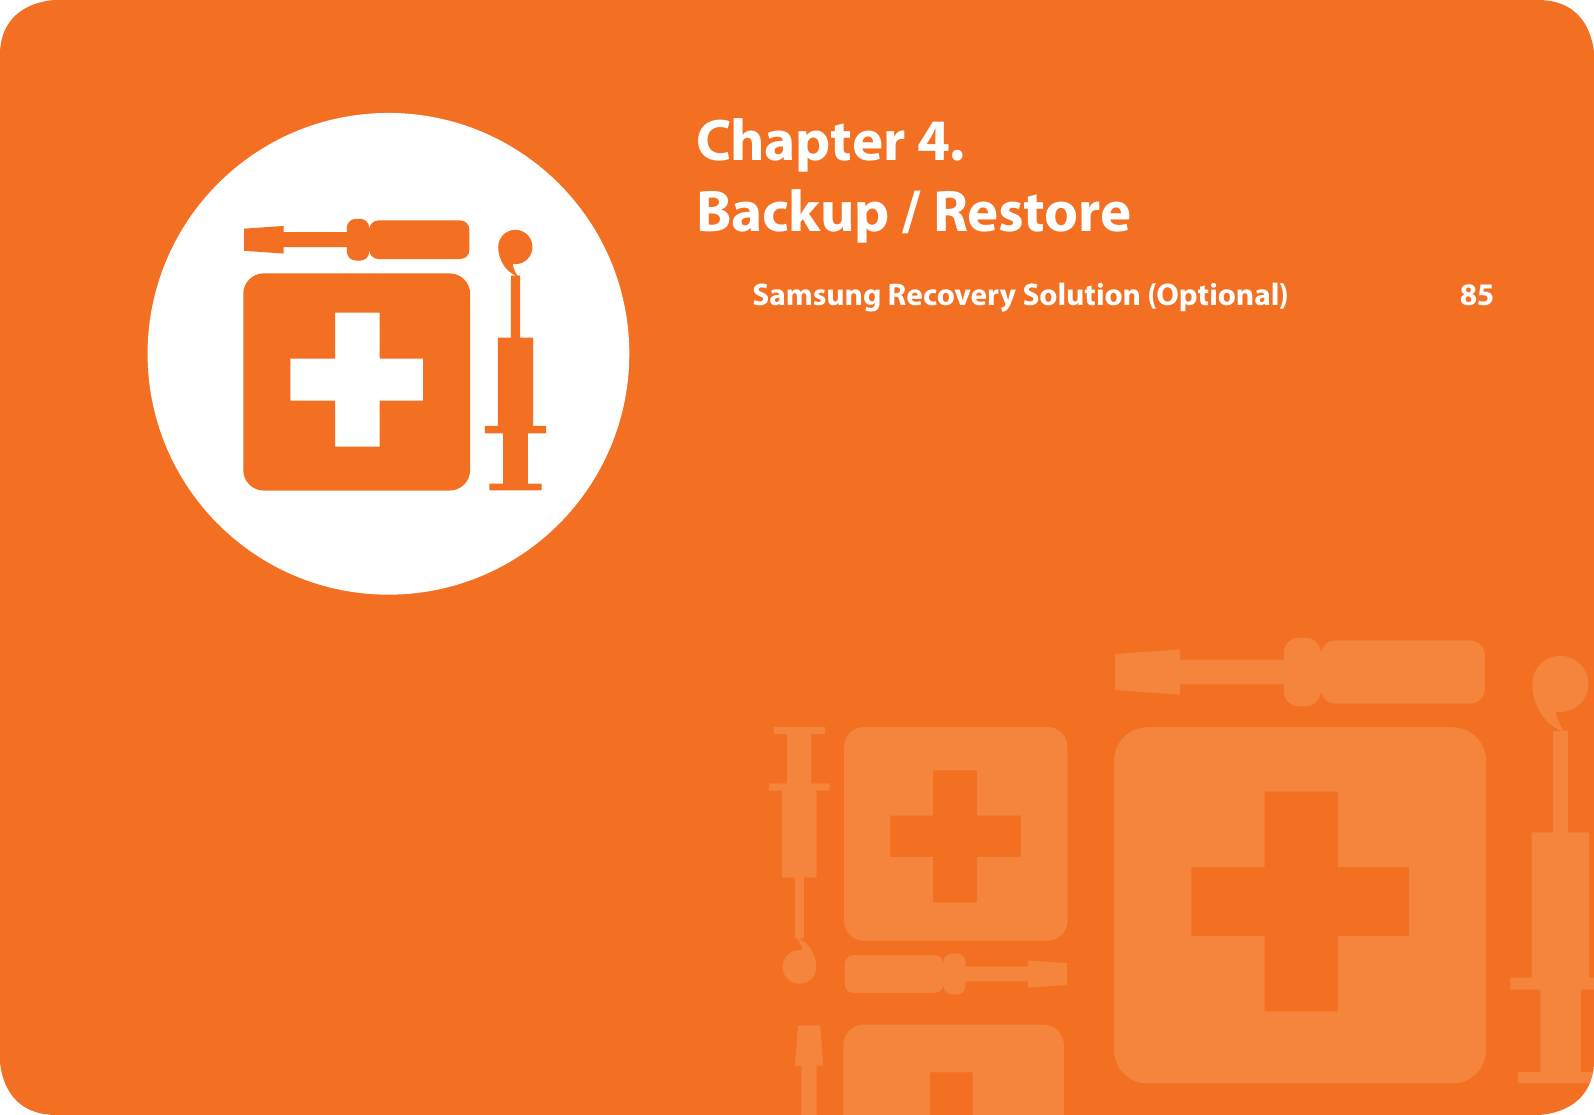  Chapter  4. Backup / RestoreSamsung Recovery Solution (Optional)  85